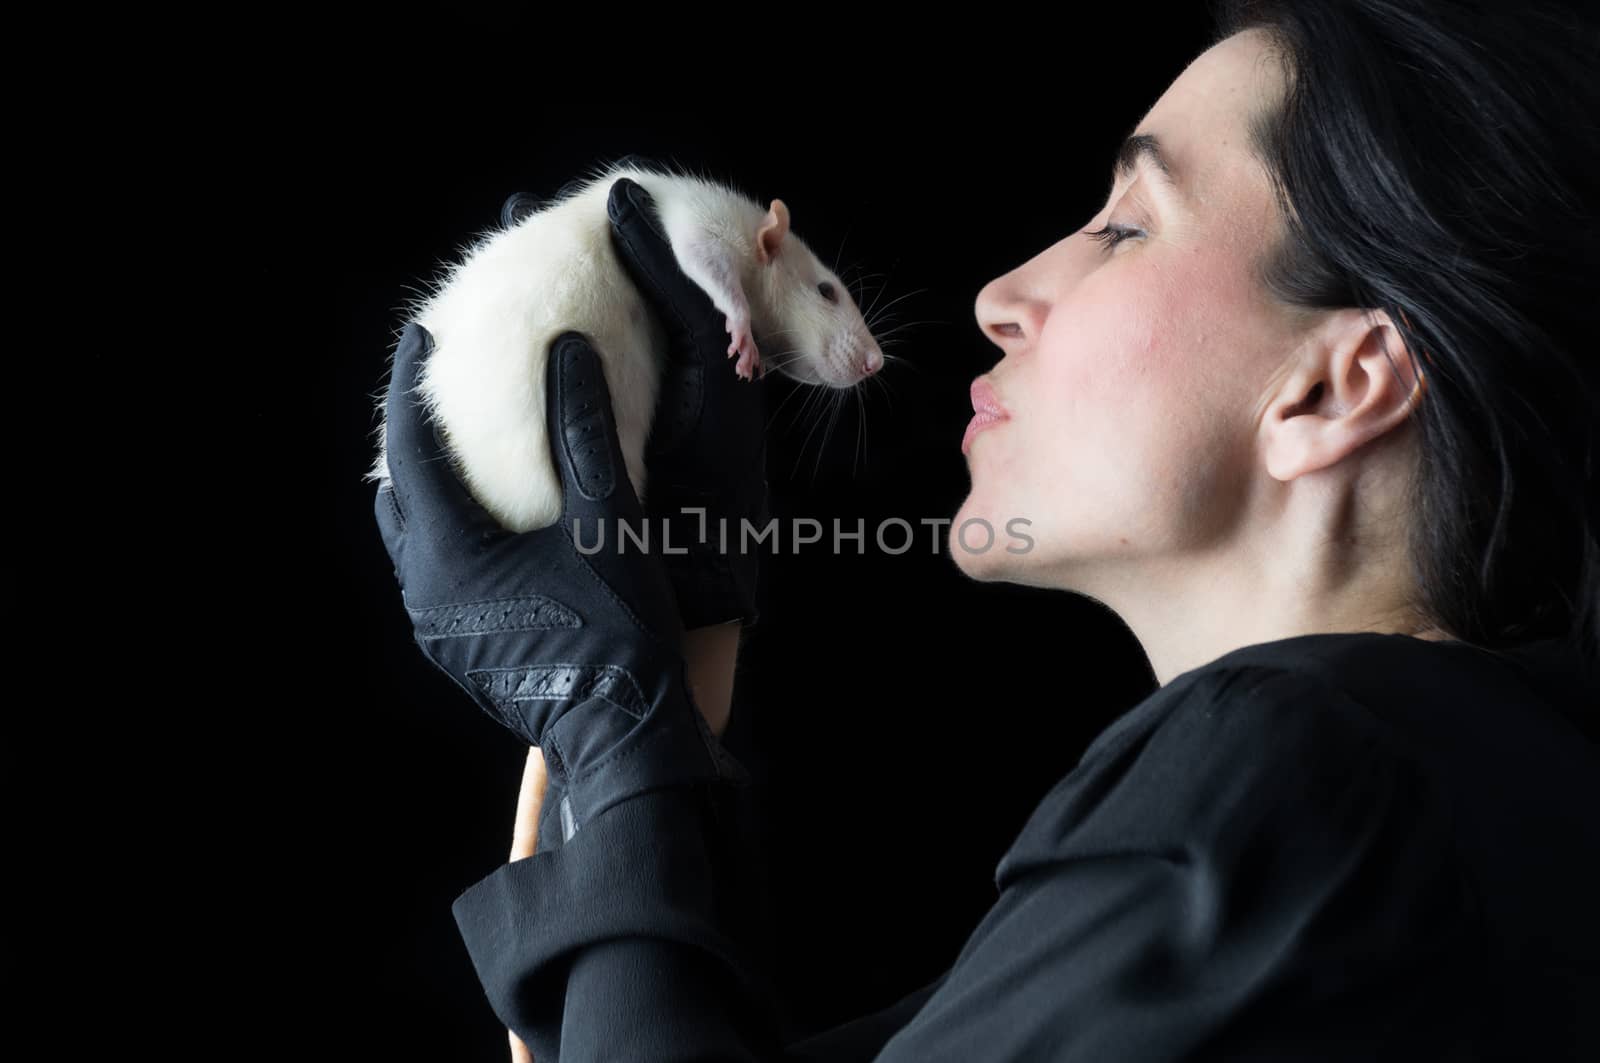 Woman in Black with White Rat by Toro_the_Bull